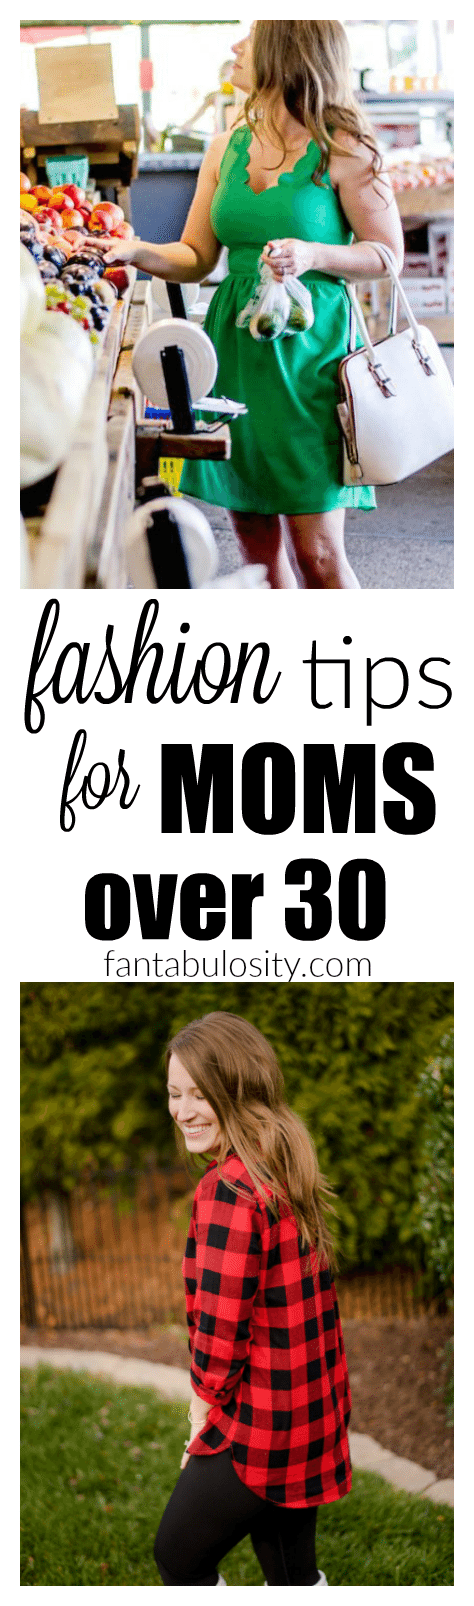 Fashion tips ideas for mom and the stores she loves to shop at are affordable and practical. topqa.info